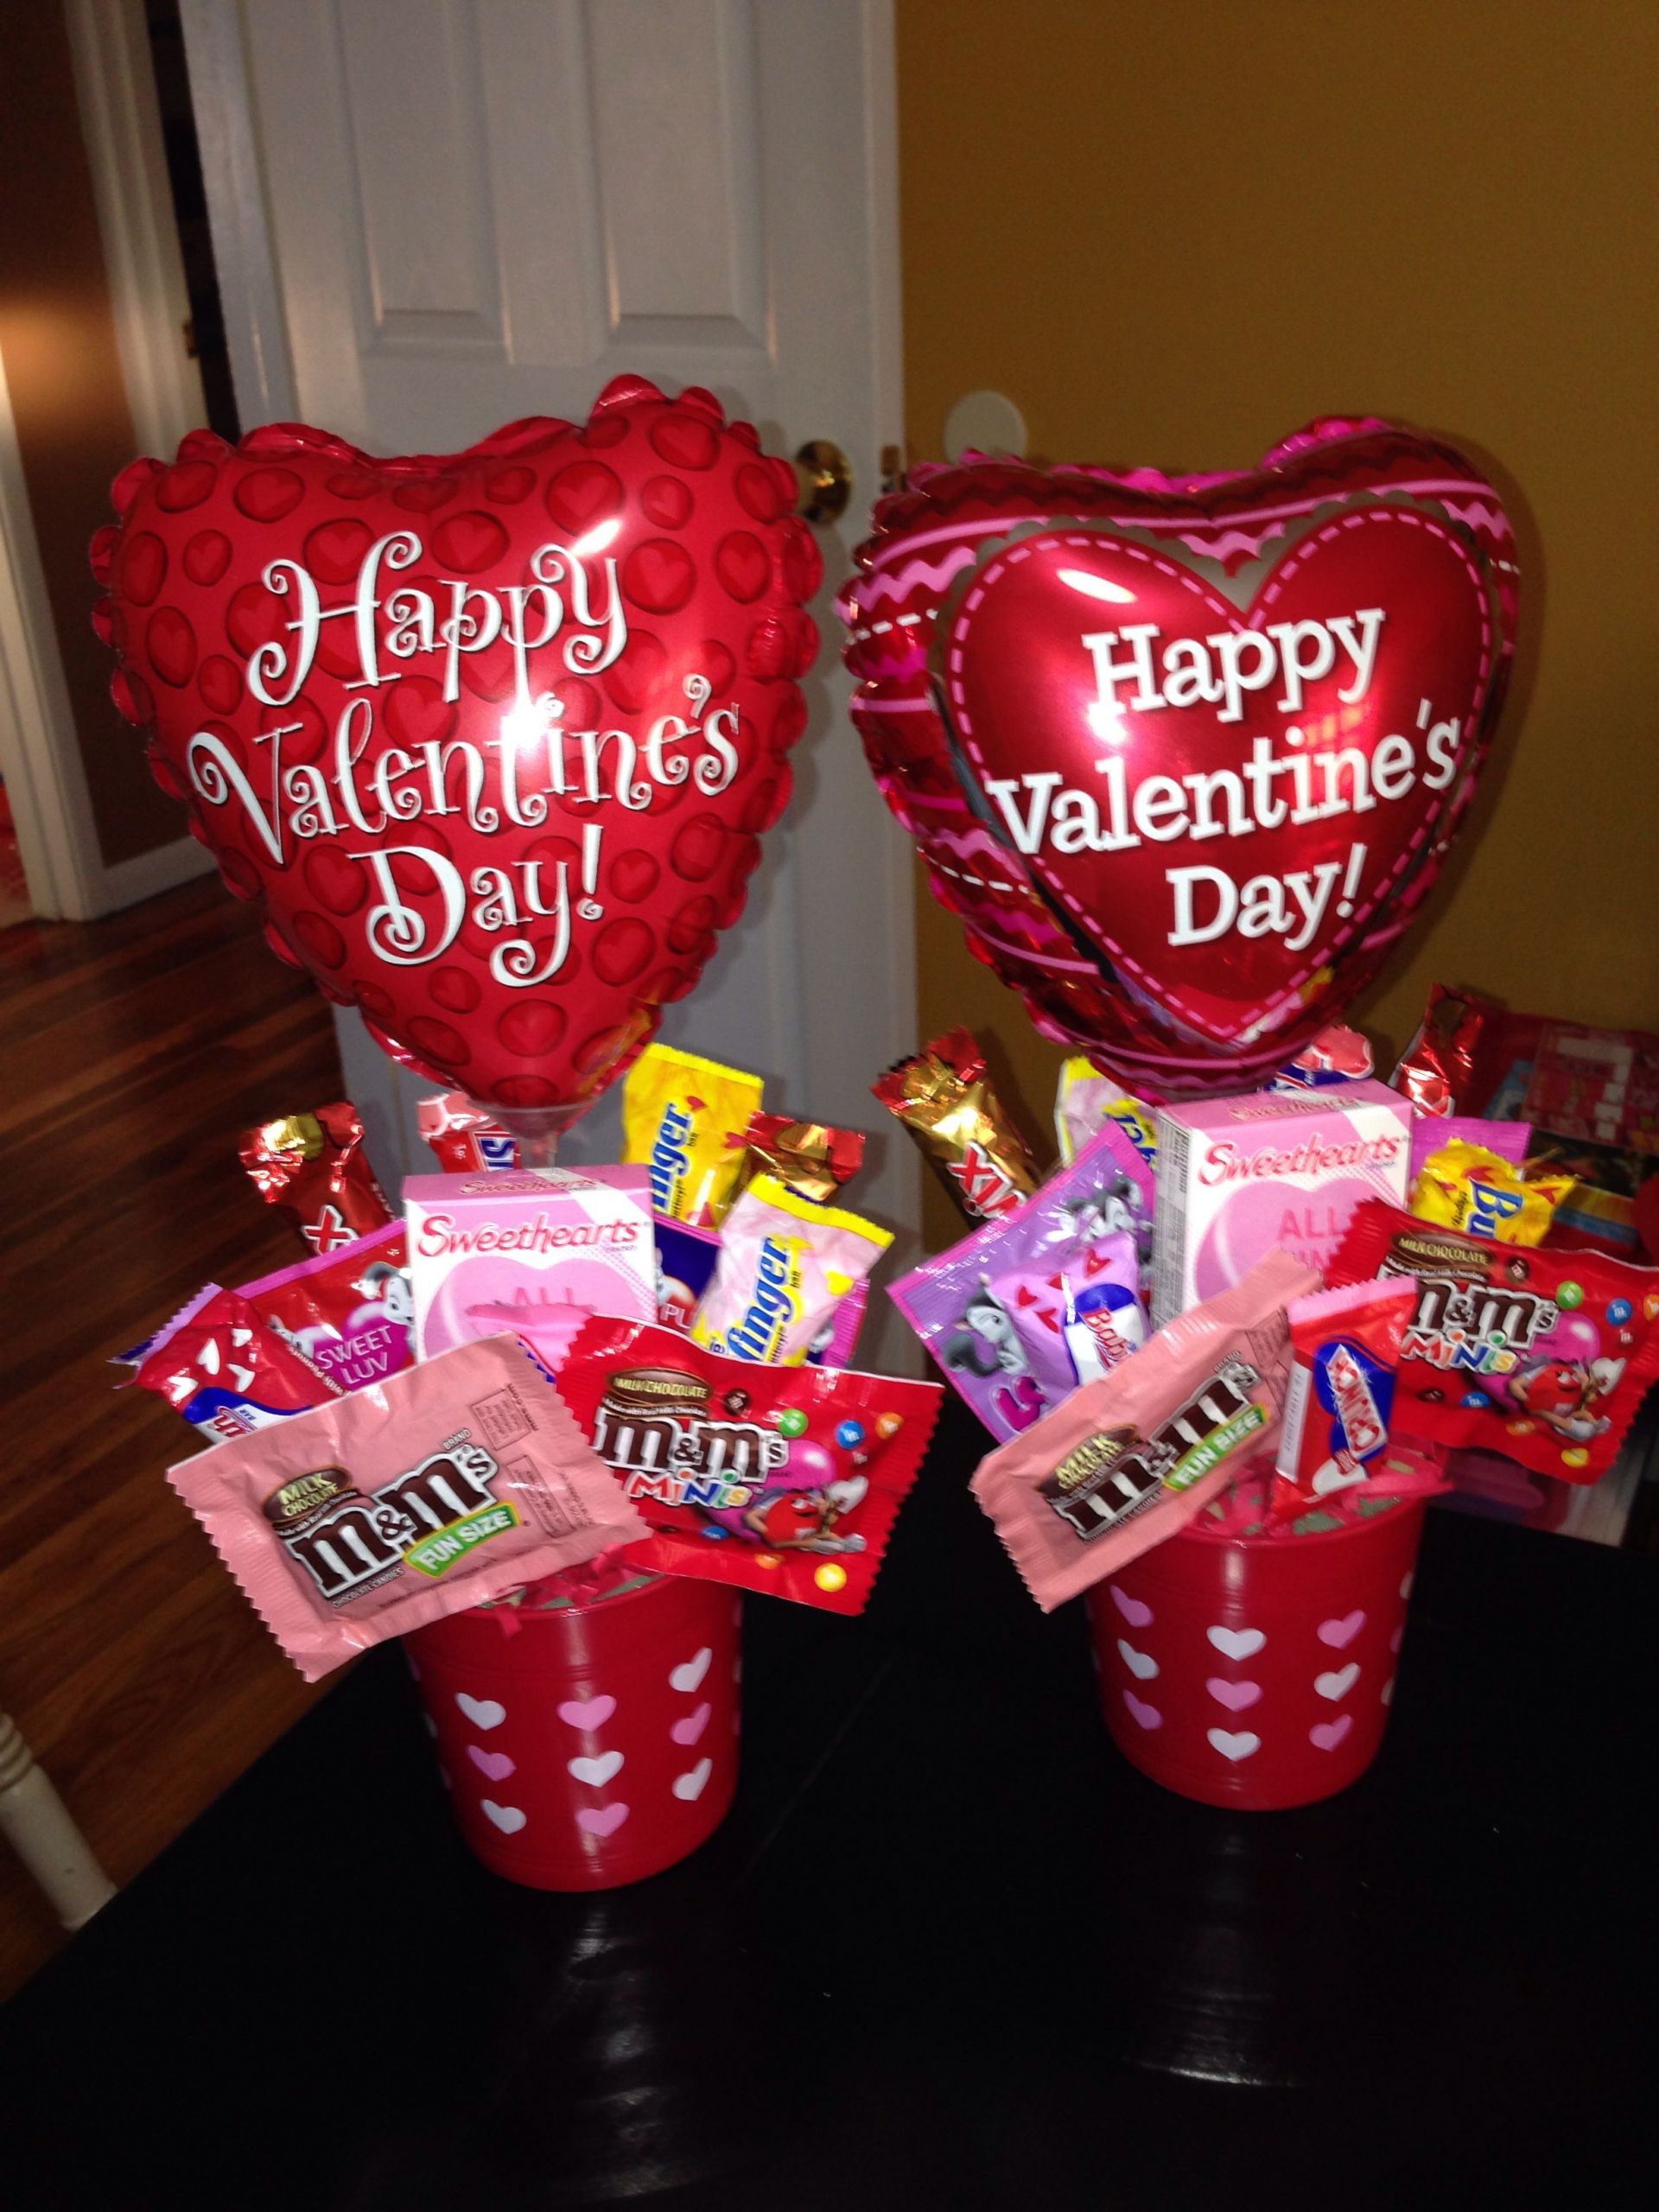 Gift Ideas For Friends Valentines
 Small valentines bouquets